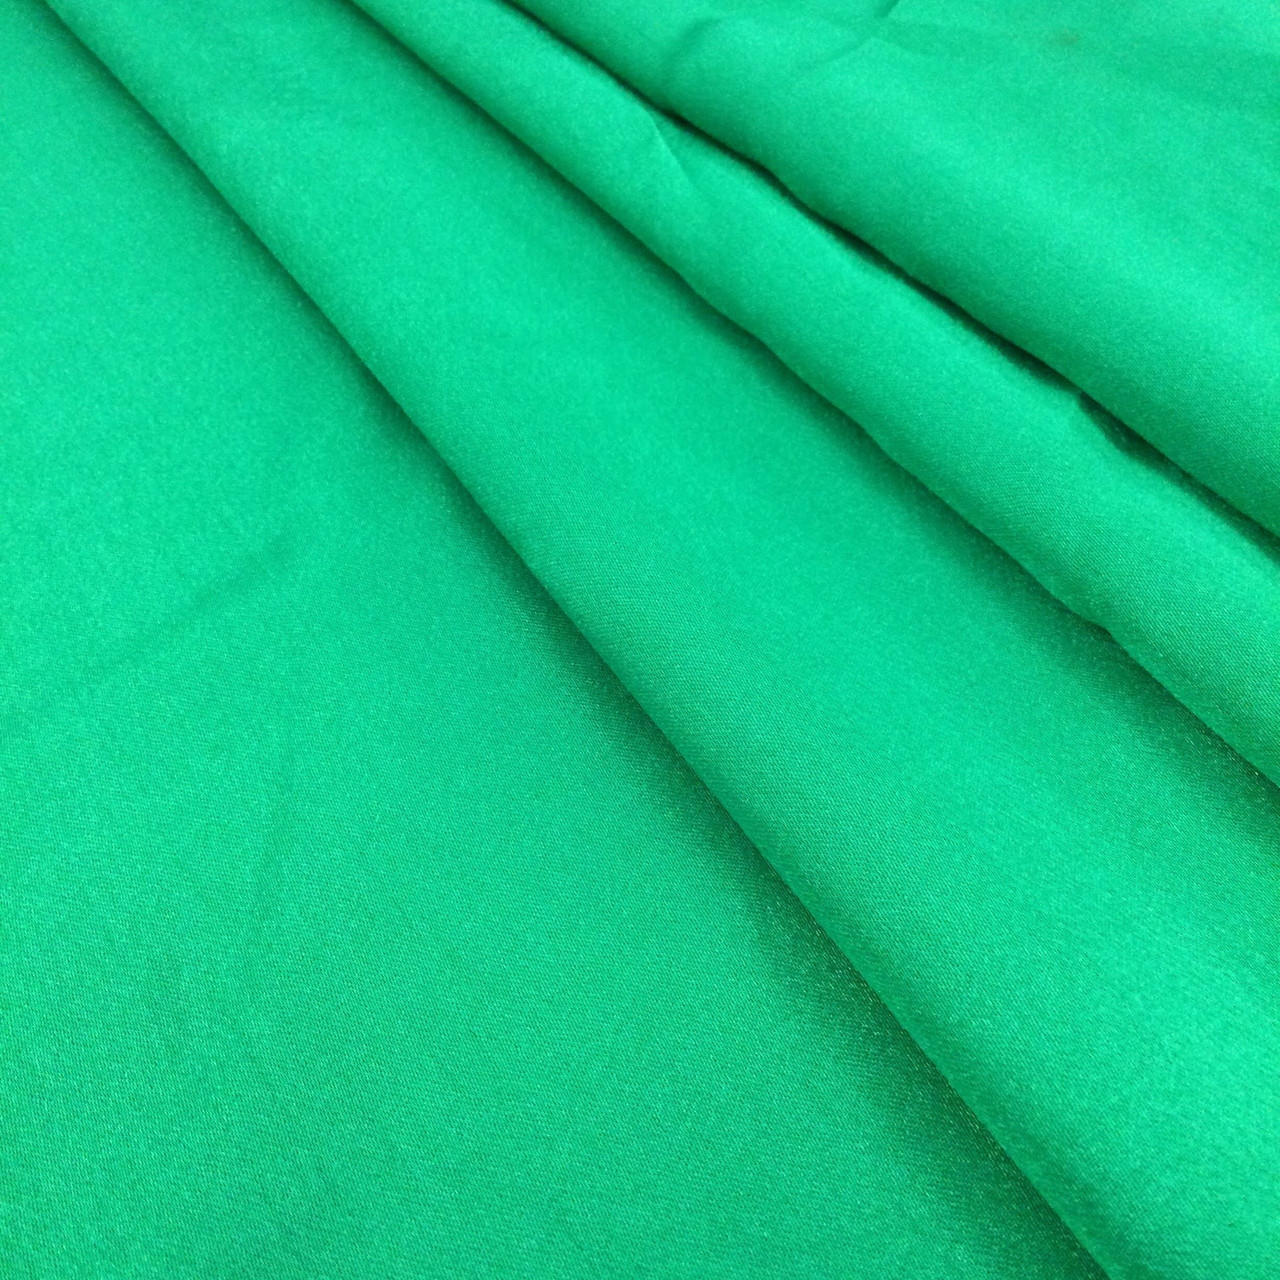 SOLID SATIN FABRIC - LIME GREEN - 60 WIDTH - SOLD BTY 